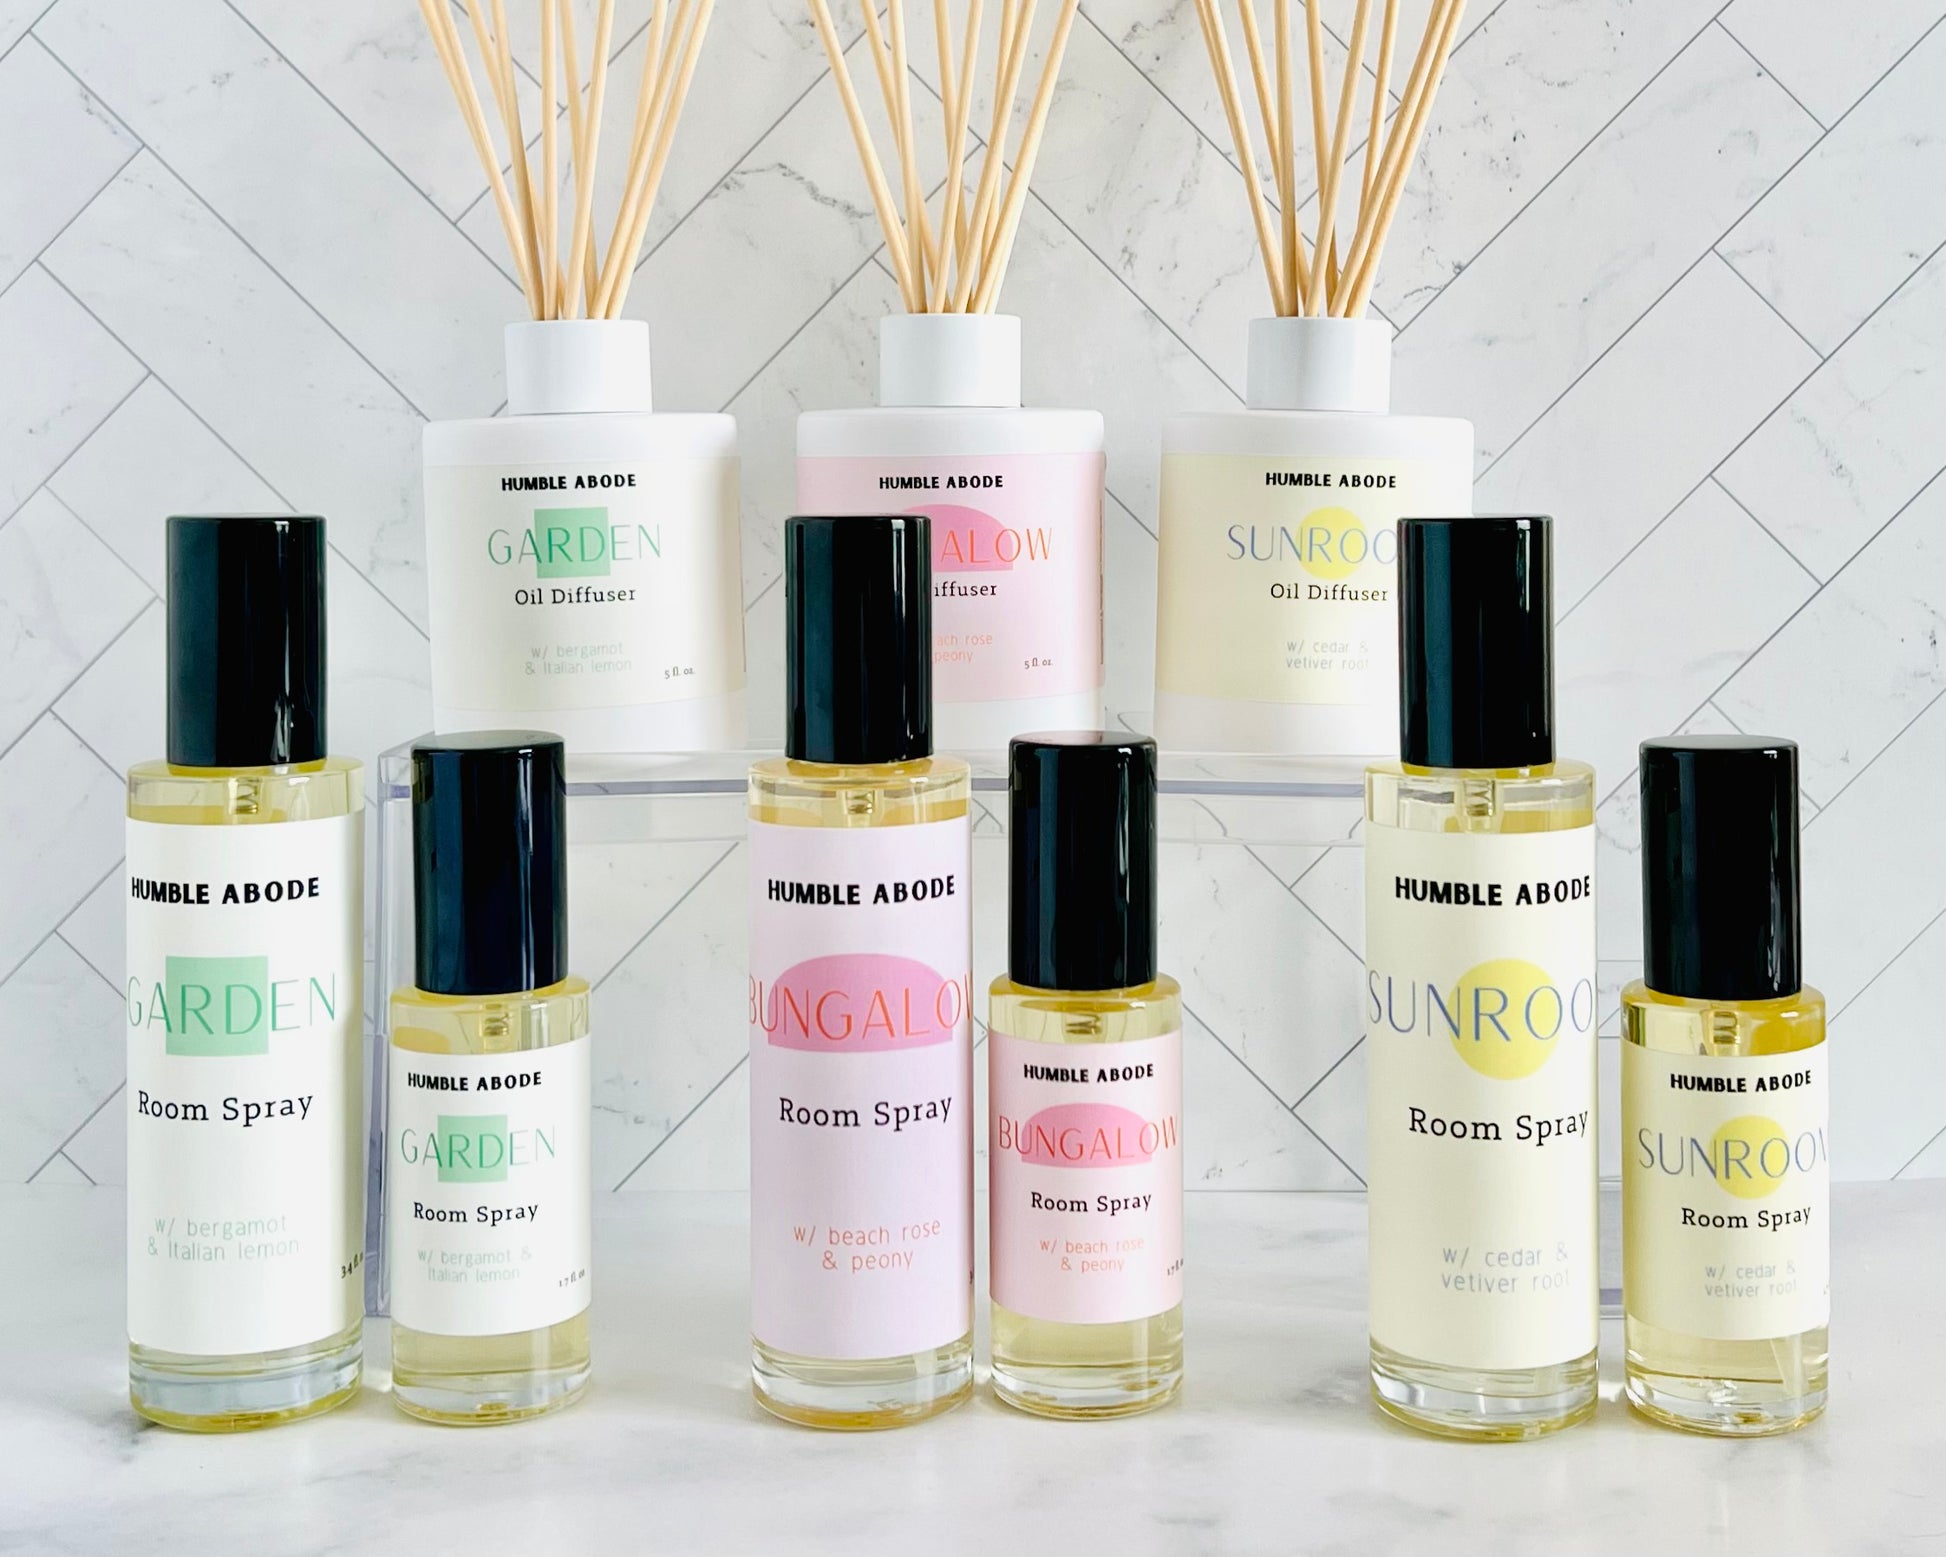 Our collection of Room Sprays in all scents and sizes - Humble Abode